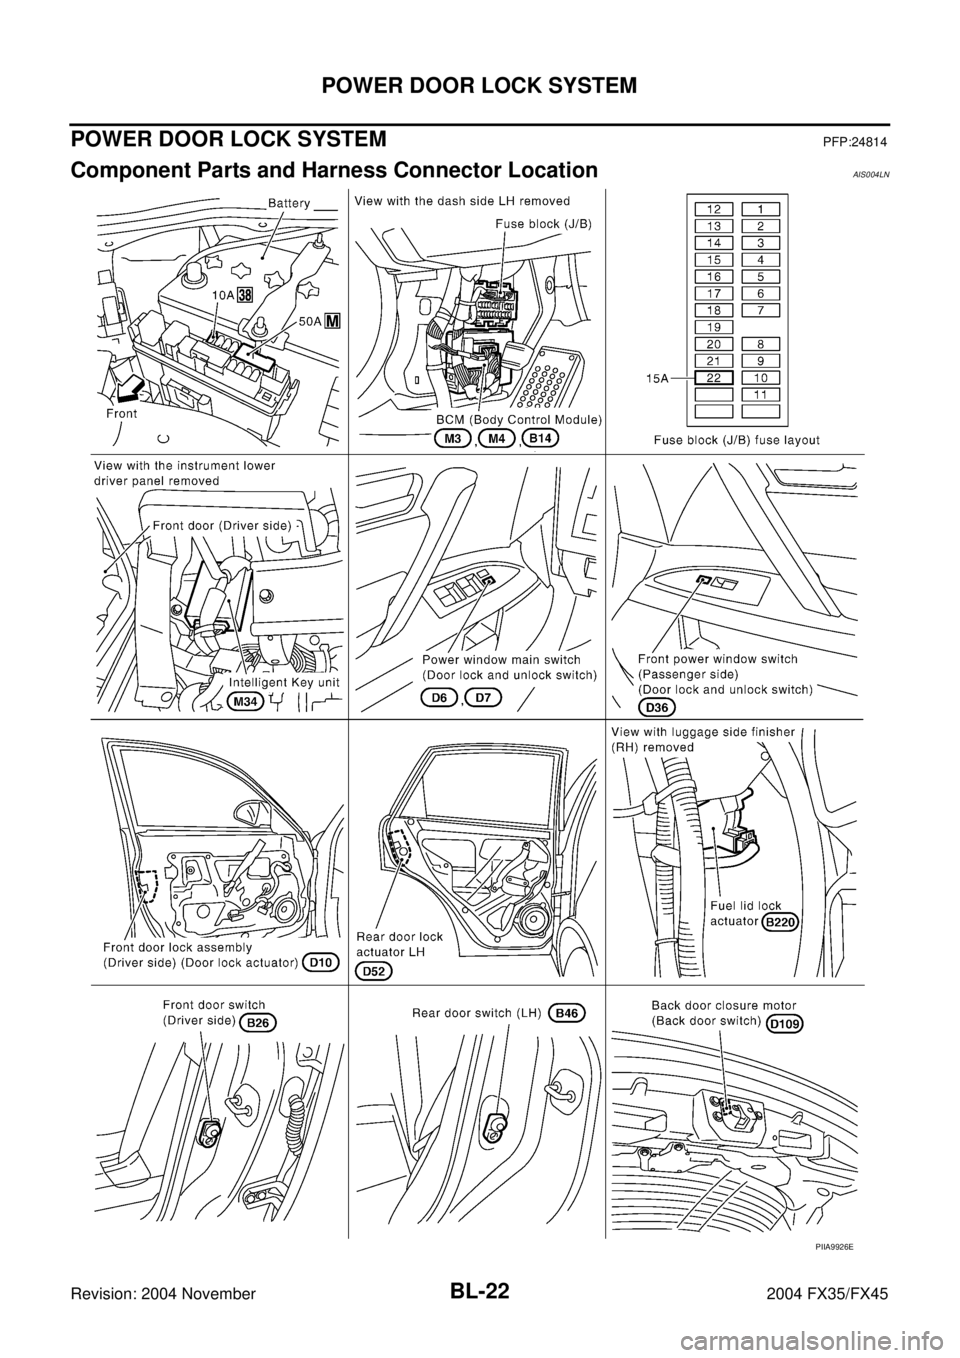 INFINITI FX35 2004  Service Manual BL-22
POWER DOOR LOCK SYSTEM
Revision: 2004 November 2004 FX35/FX45
POWER DOOR LOCK SYSTEMPFP:24814
Component Parts and Harness Connector LocationAIS004LN
PIIA9926E 